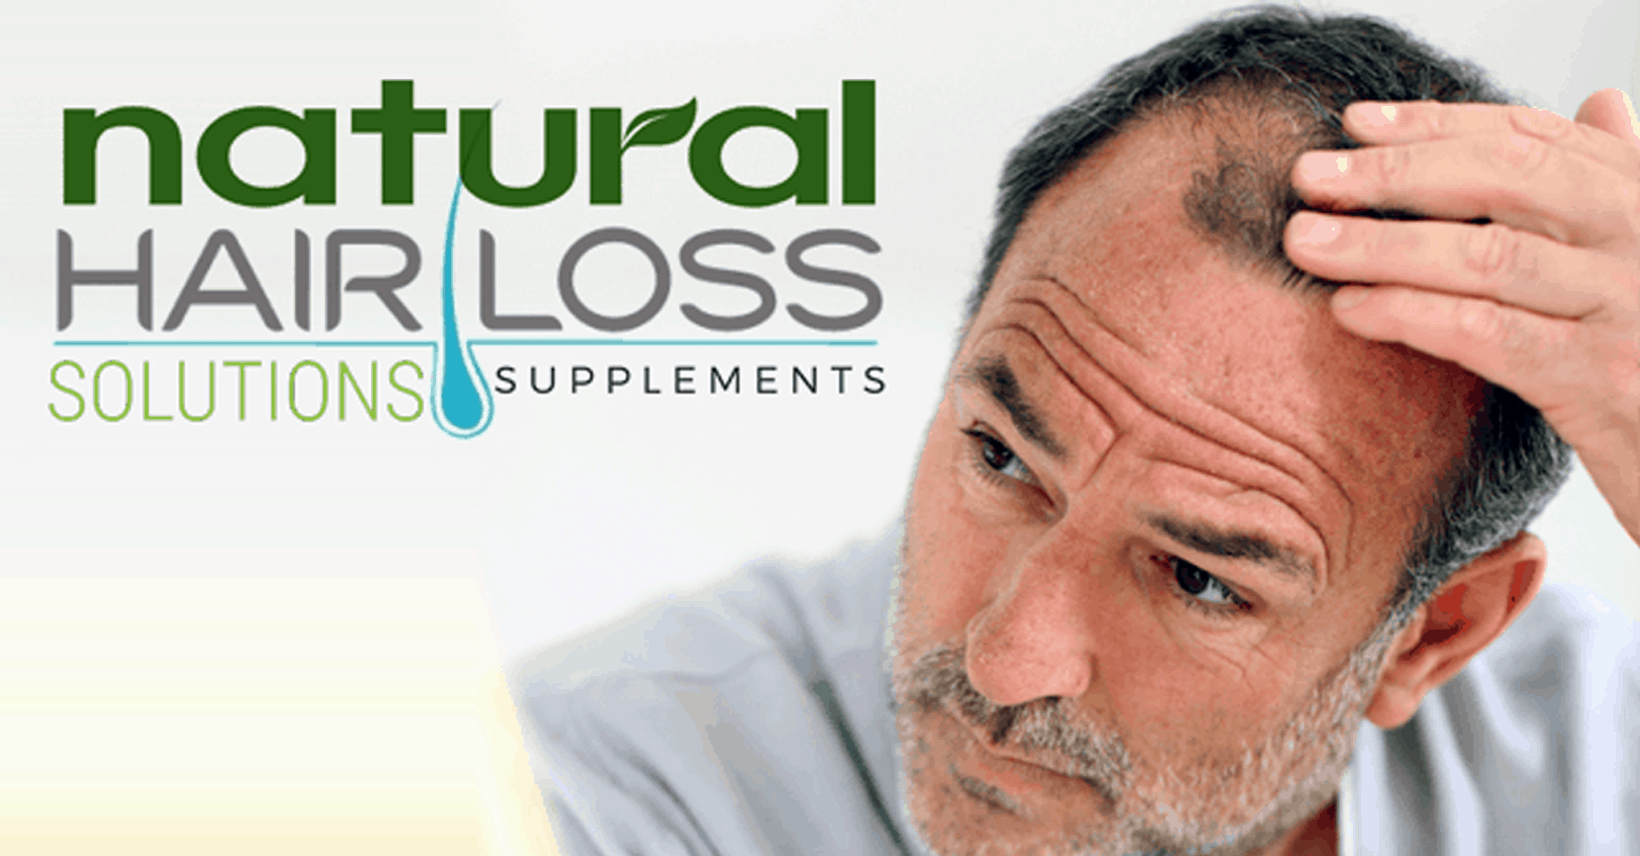 15 Hair Loss Supplements and Natural Solutions To Try If You’re Losing